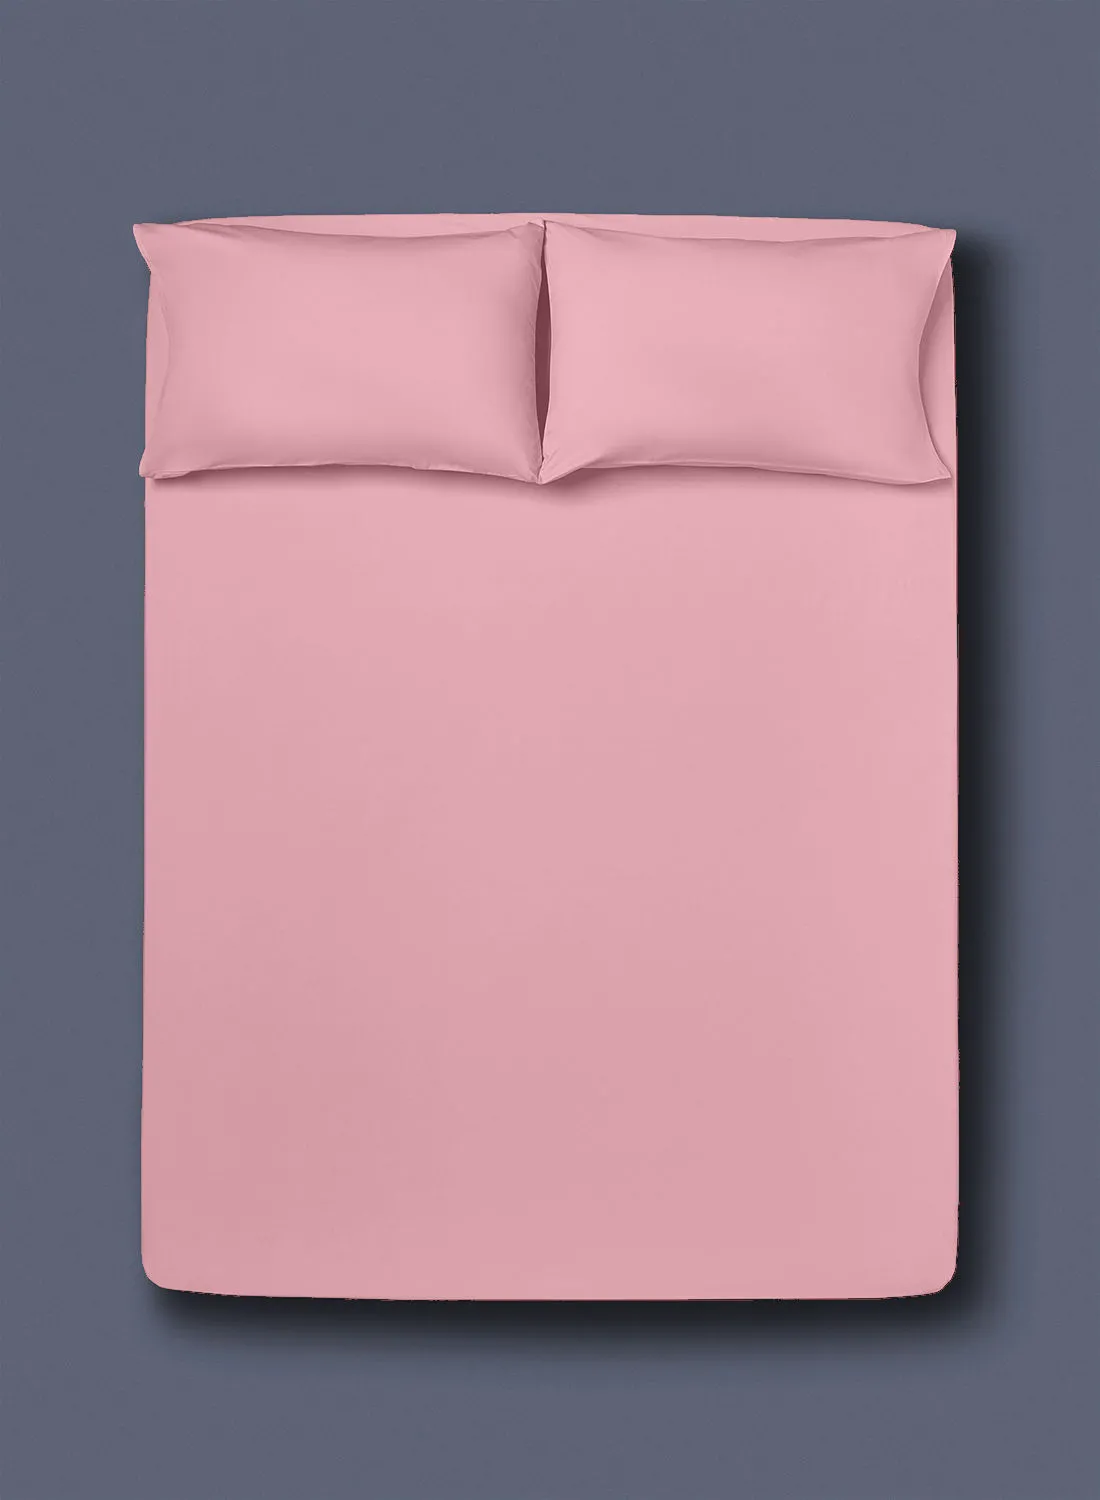 Amal Fitted Bedsheet Set Twin Size  100% Cotton Light Weight Everyday Use 144 TC High Quality 1 Bed Sheet And 2 Pillow Cases Pink Color